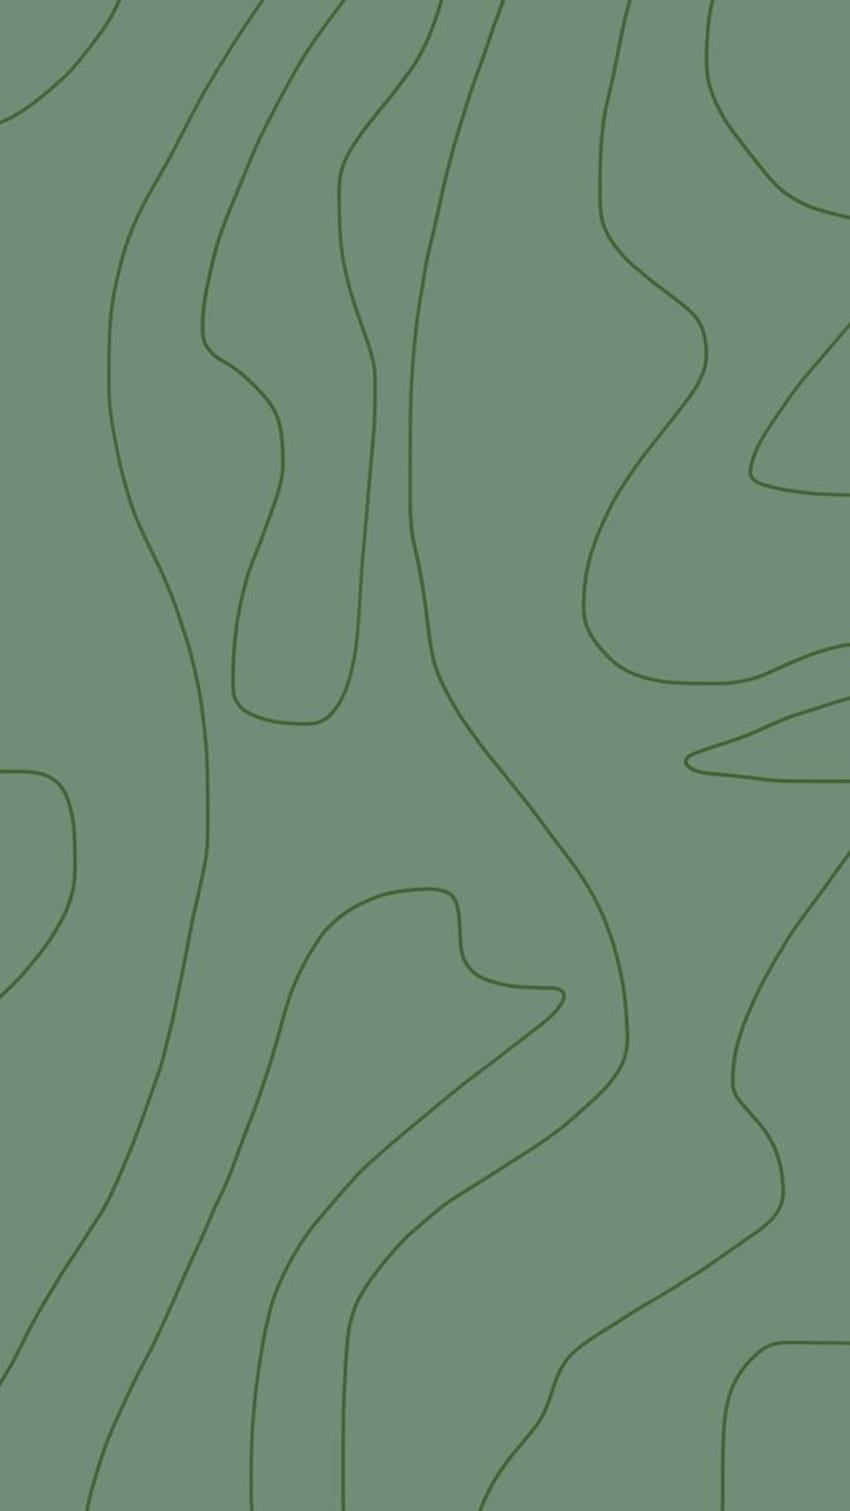 An abstract image of a topography map in green - Sage green